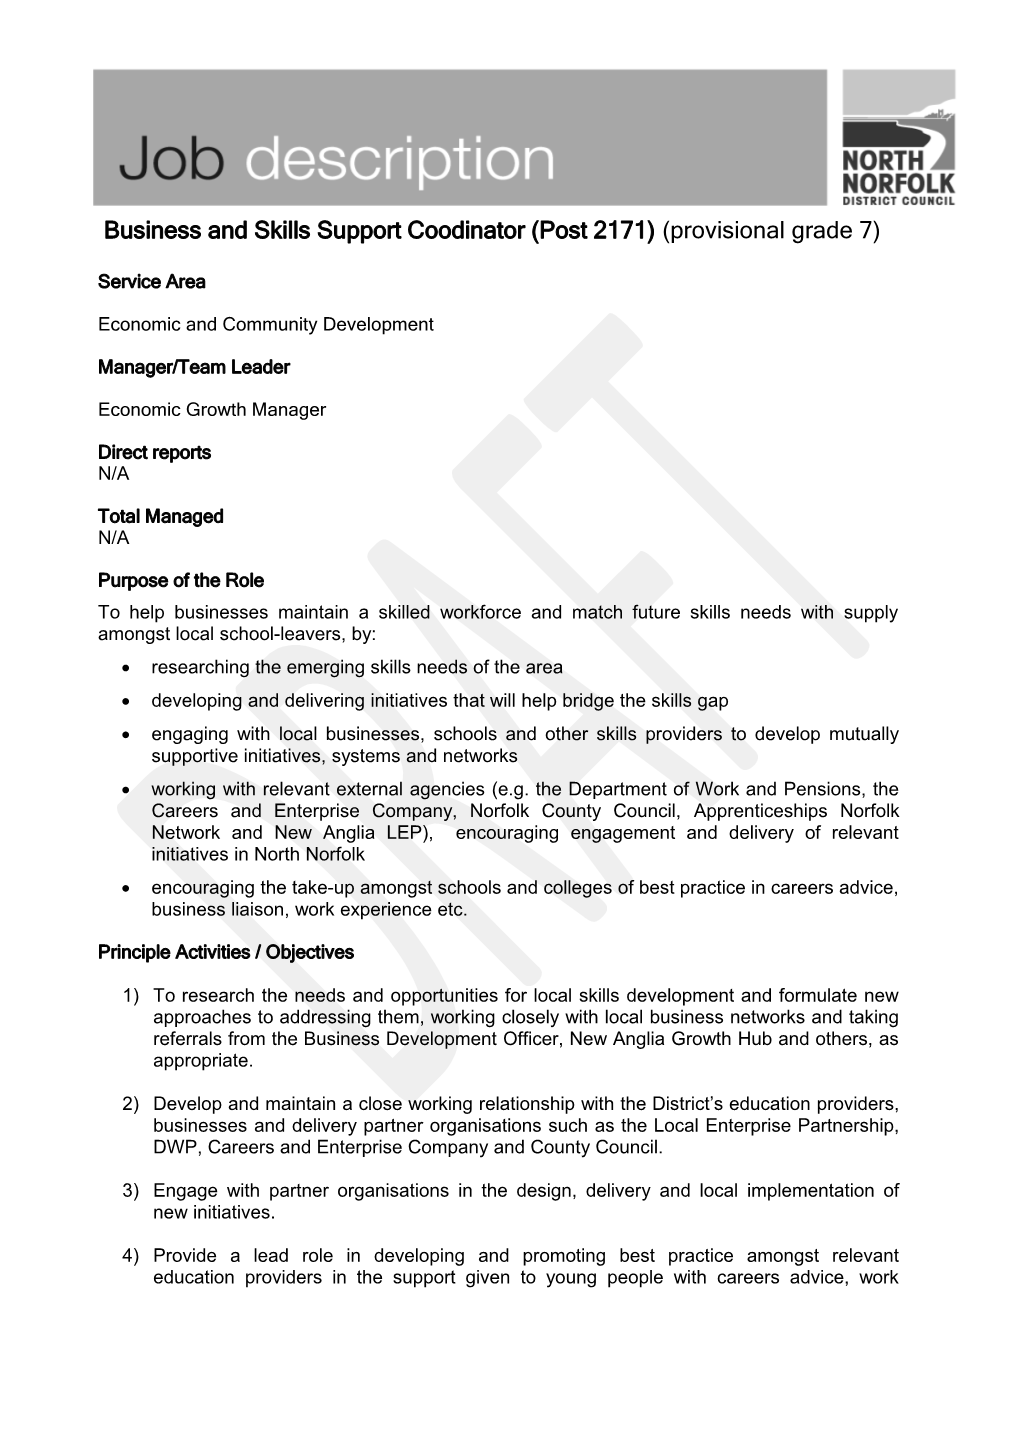 Business and Skills Support Coodinator (Post 2171) (Provisional Grade 7)